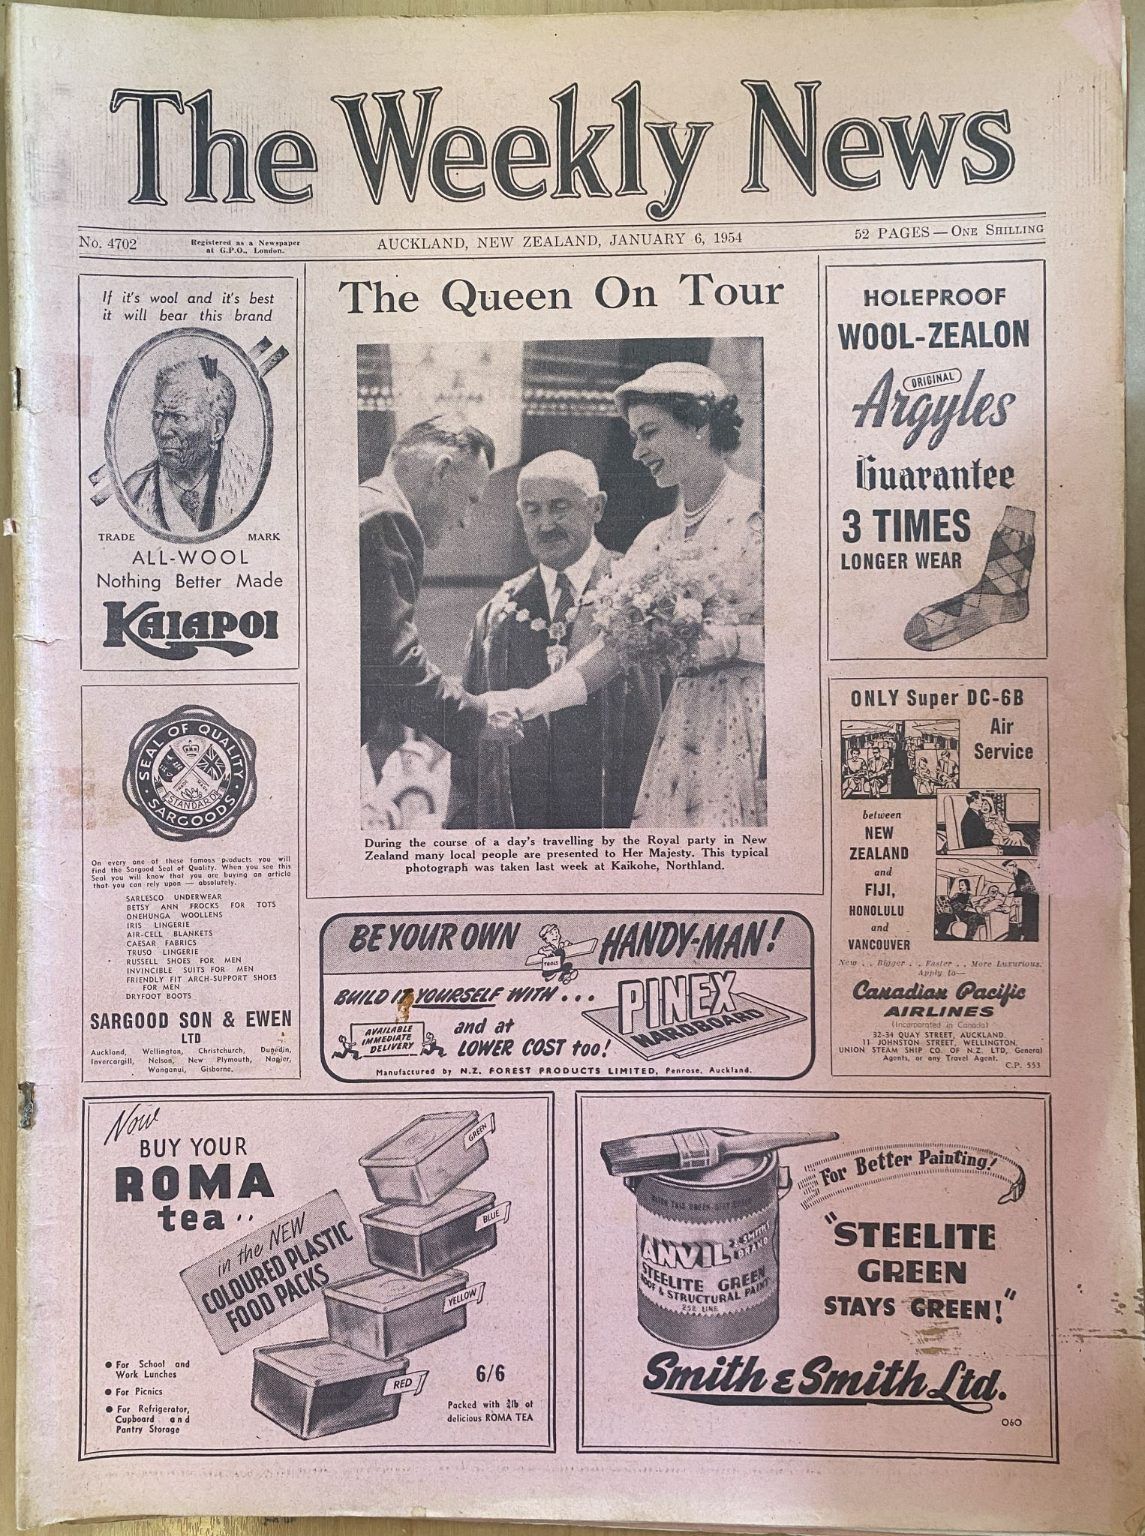 OLD NEWSPAPER: The Weekly News - No. 4702, 6 January 1954